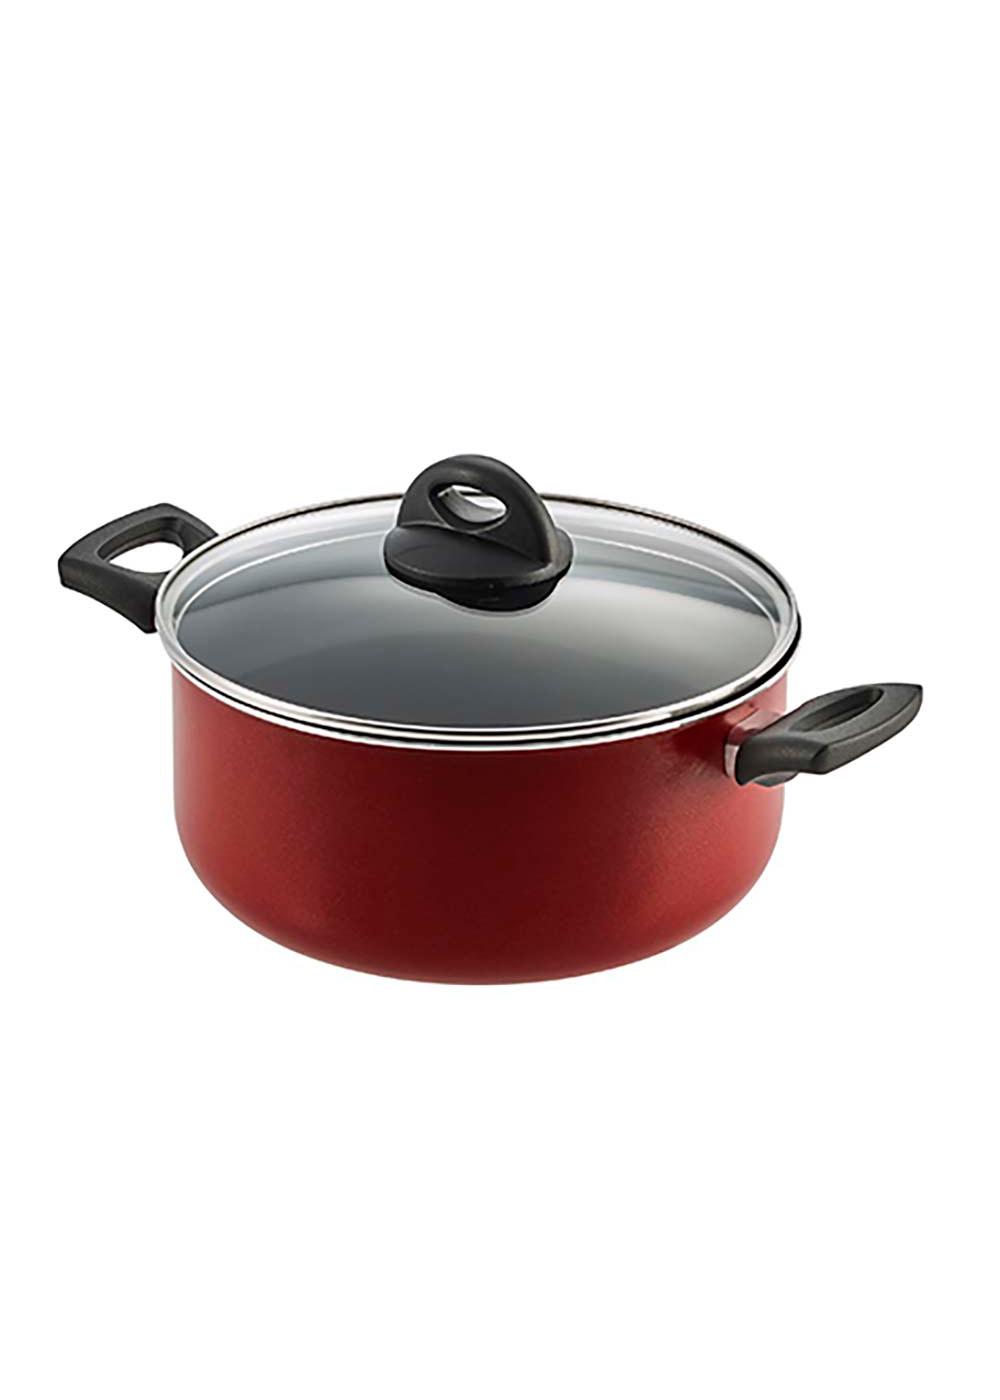 Tramontina Non-Stick Red Cookware Set; image 12 of 14